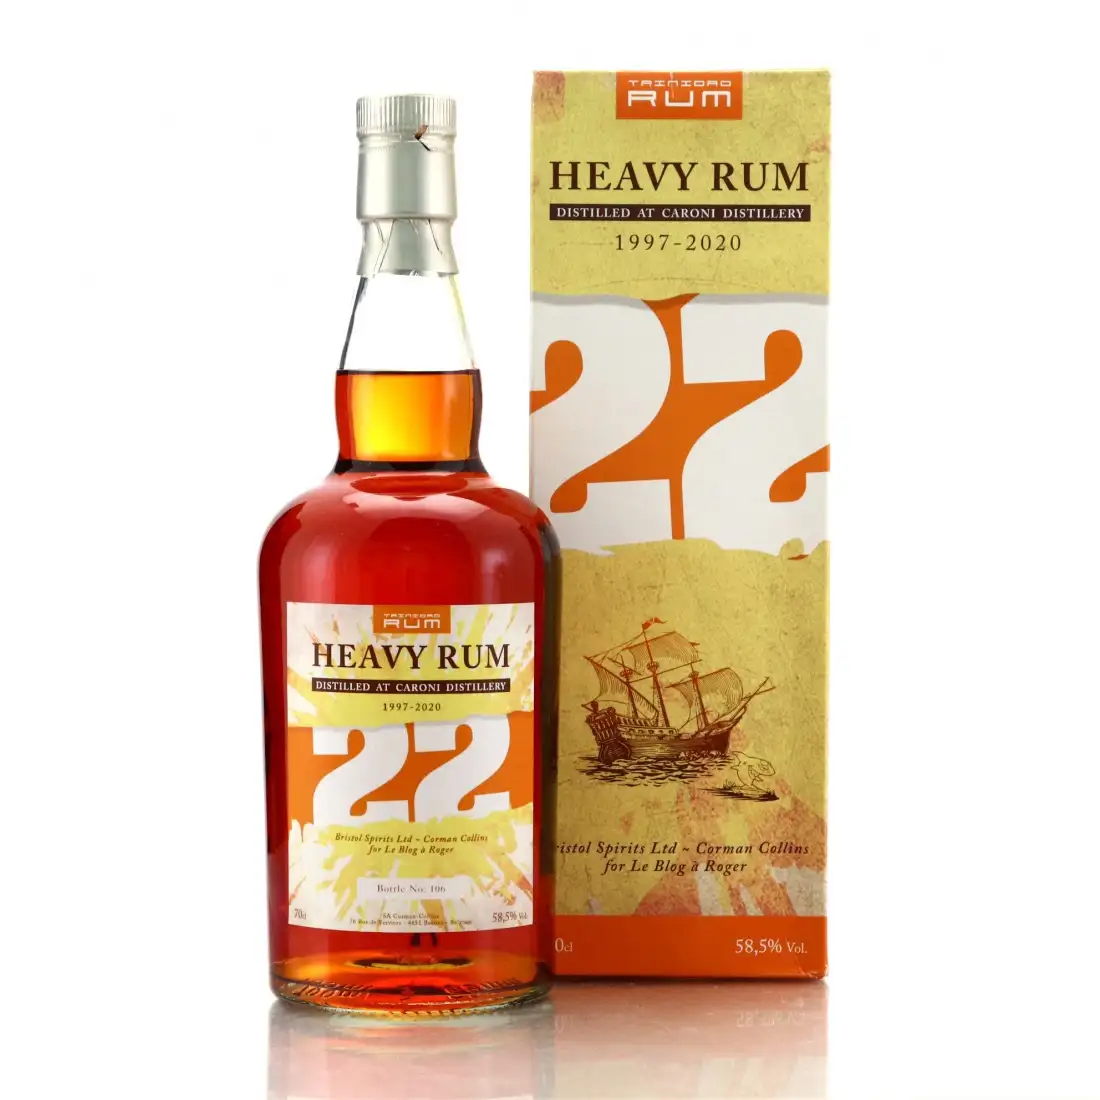 Image of the front of the bottle of the rum HTR - Le blog à Roger